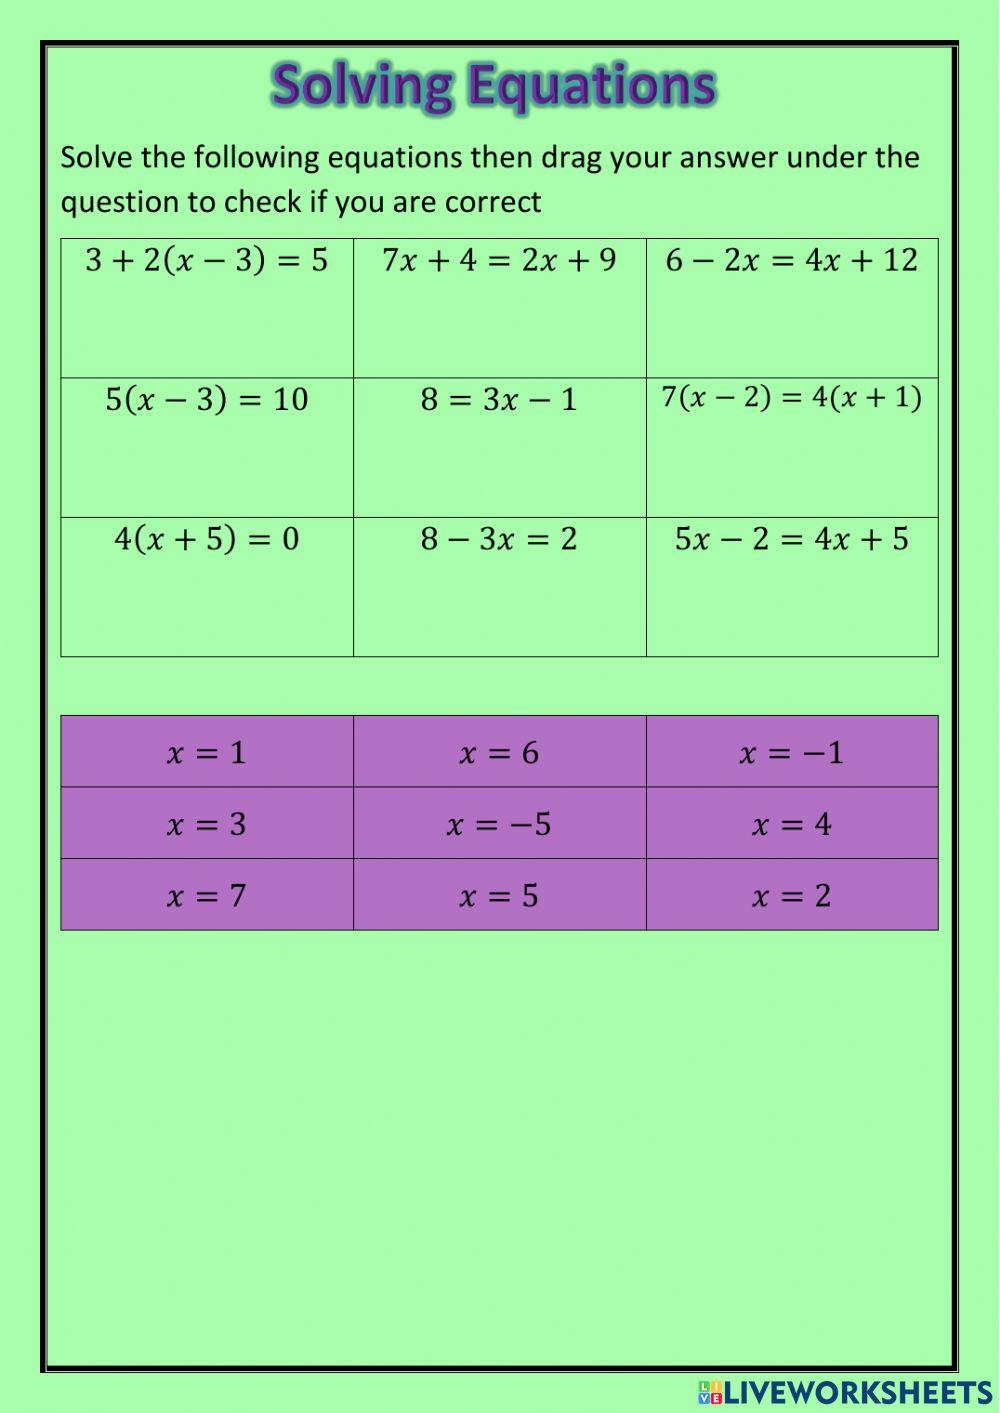 National 5 - Solving Equations